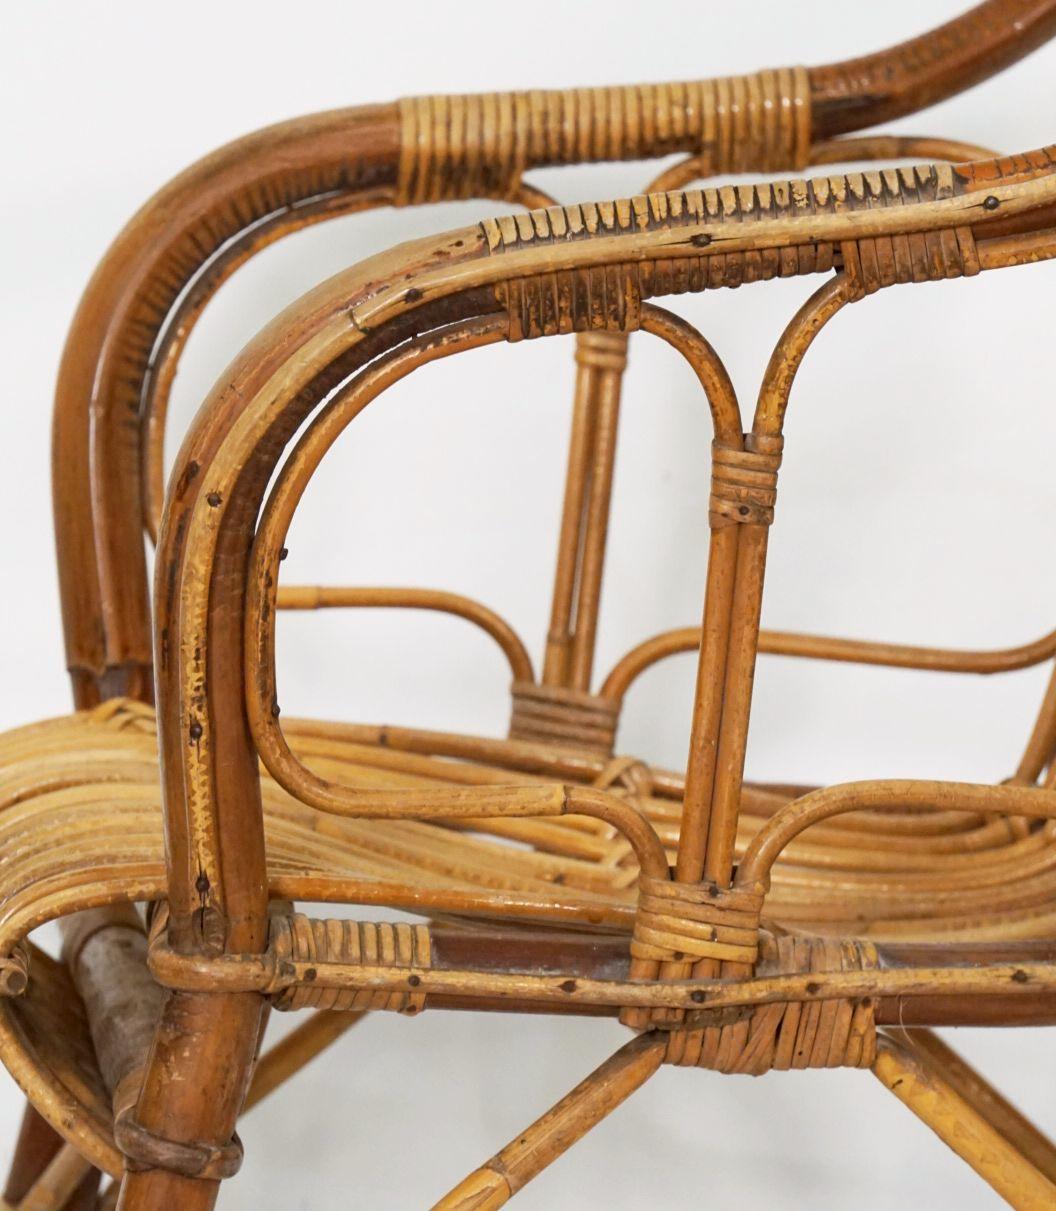 Italian Fan-Backed Arm Chairs of Rattan and Bamboo from the Mid-20th Century For Sale 2